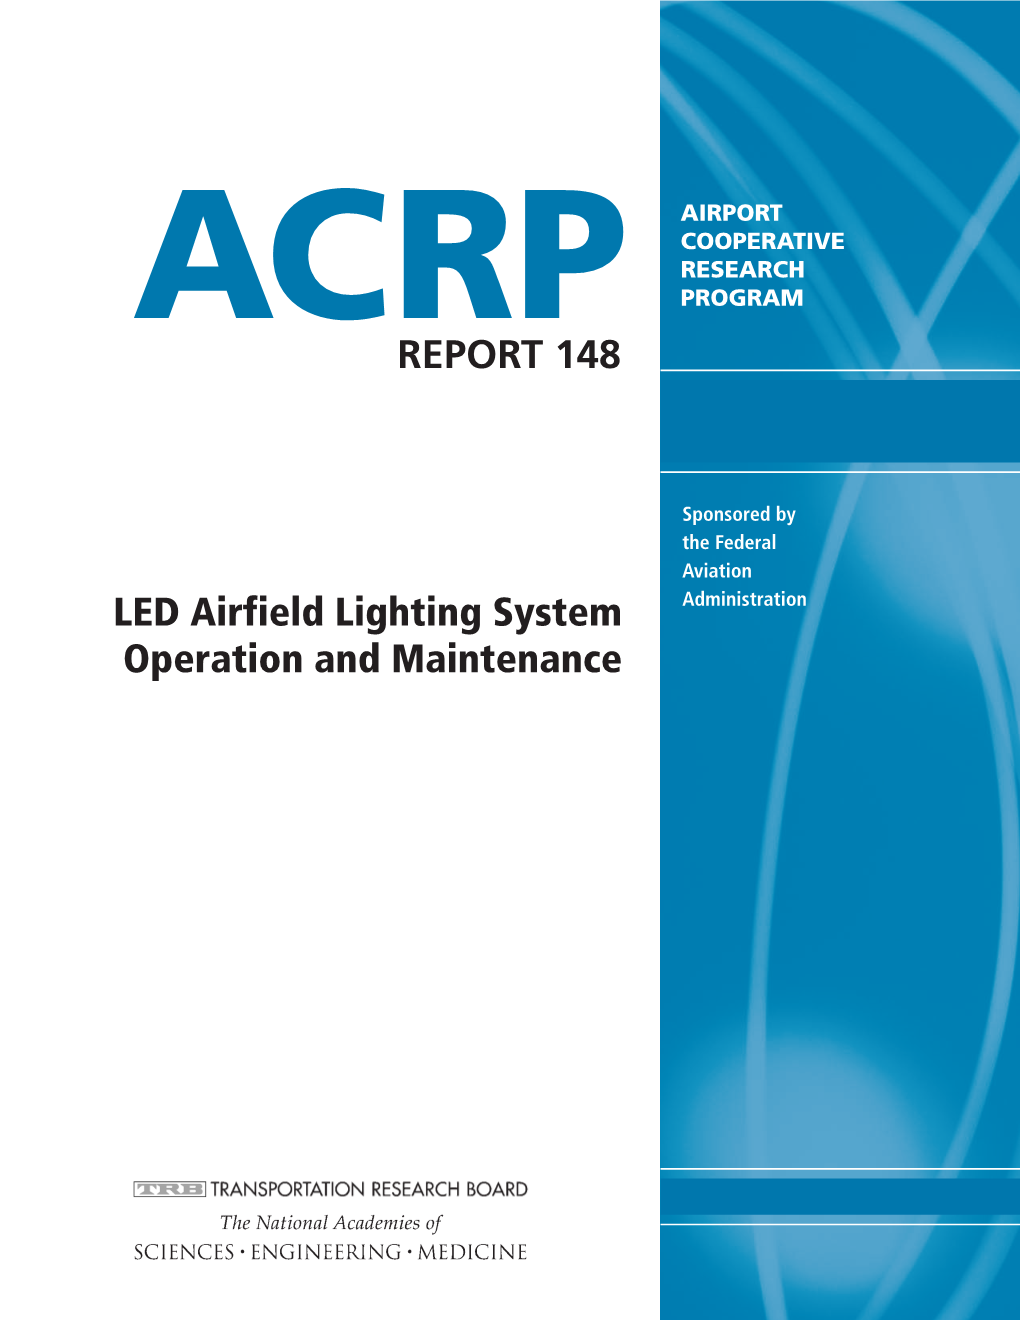 ACRP Report 148: LED Airfield Lighting System